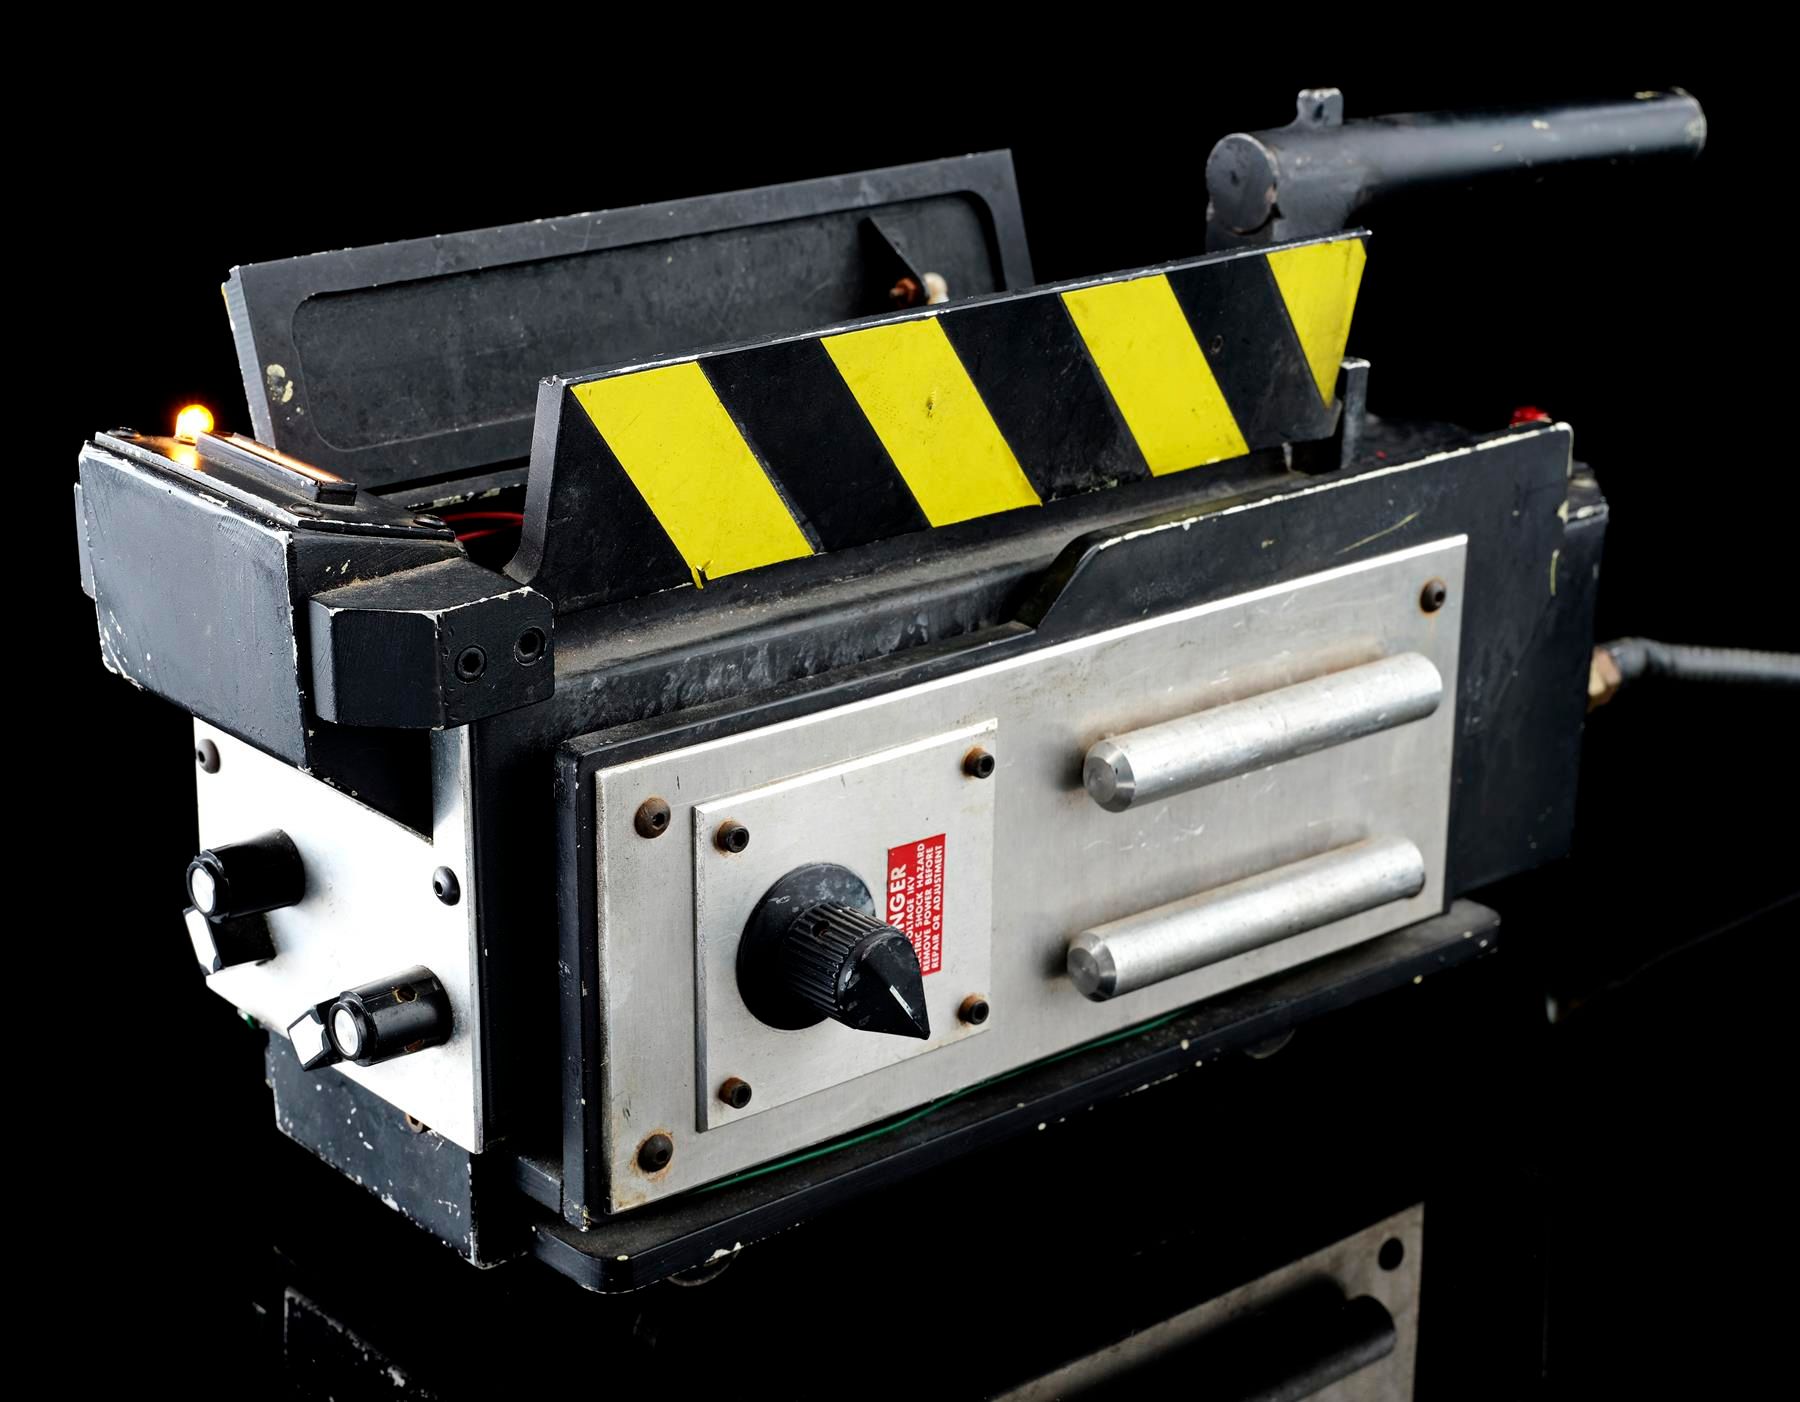 Ghostbusters trap prop